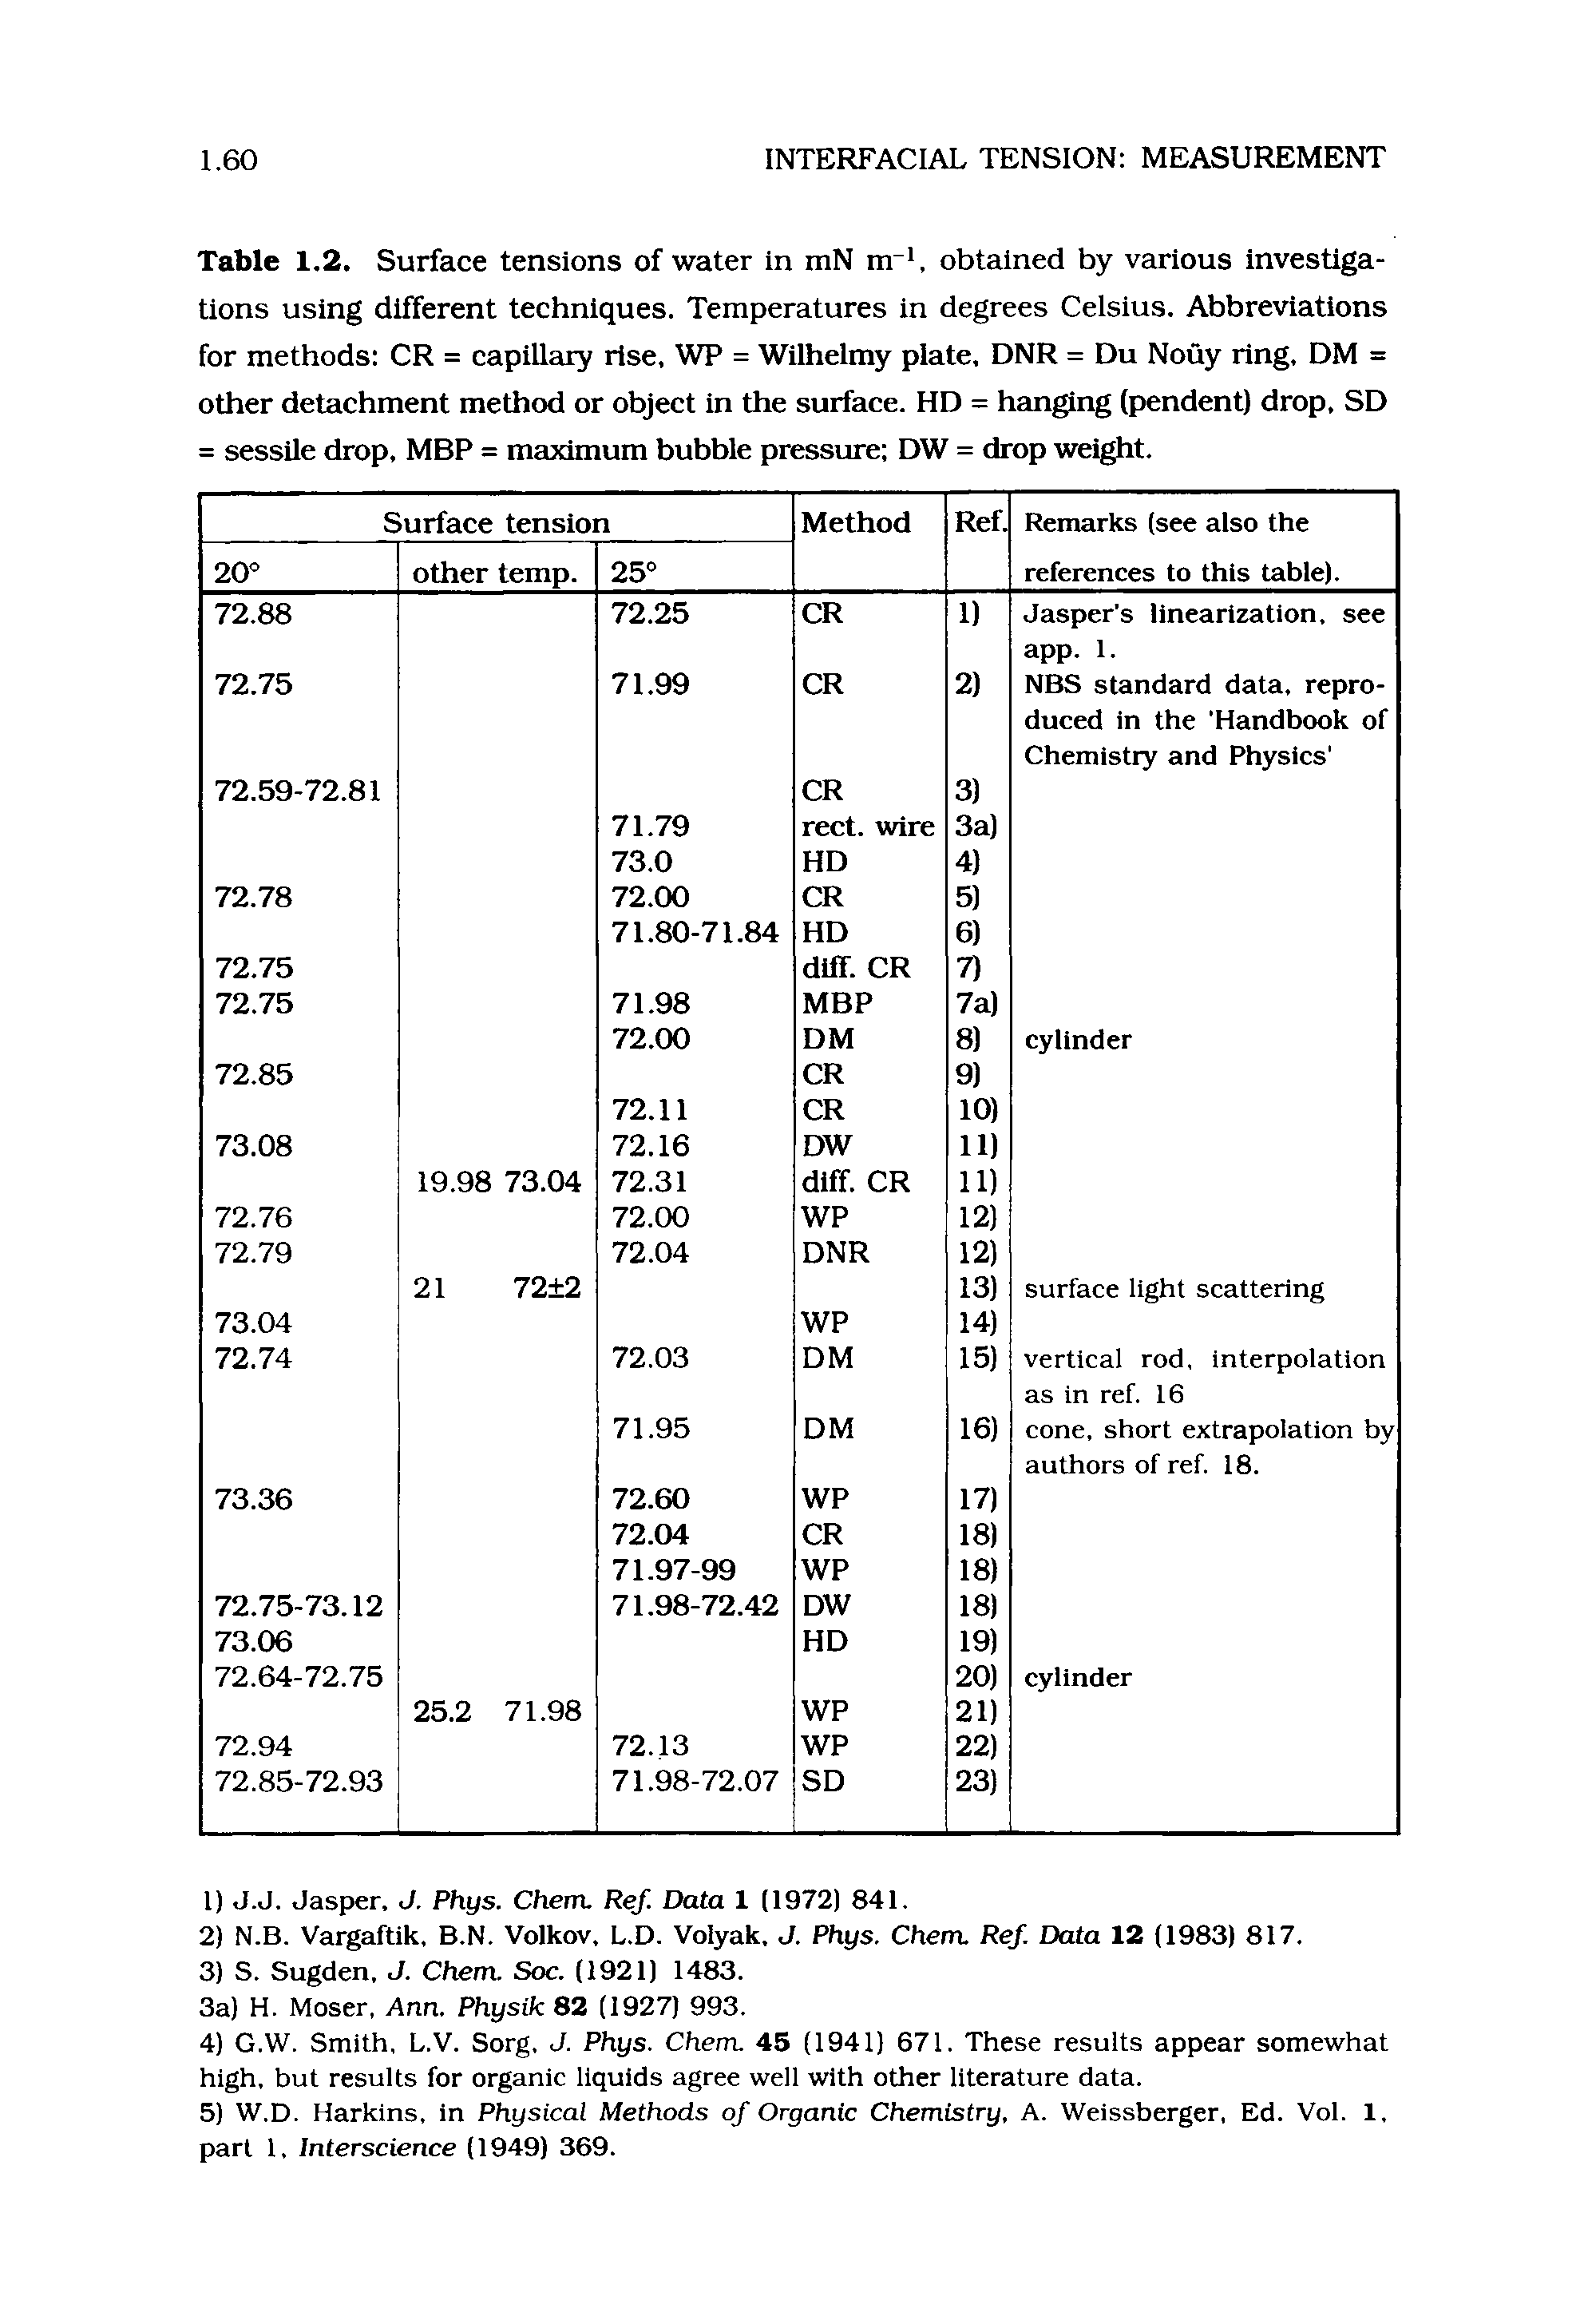 Table 1.2. Surface tensions of water in mN m , obtained by various investigations using different techniques. Temperatures in degrees Celsius. Abbreviations for methods CR = capillary rise, WP = Wilhelmy plate, DNR = Du Nouy ring, DM = other detachment method or object in the surface. HD = hanging (pendent) drop, SD = sessile drop, MBP = maximum bubble pressure DW = drop weight.